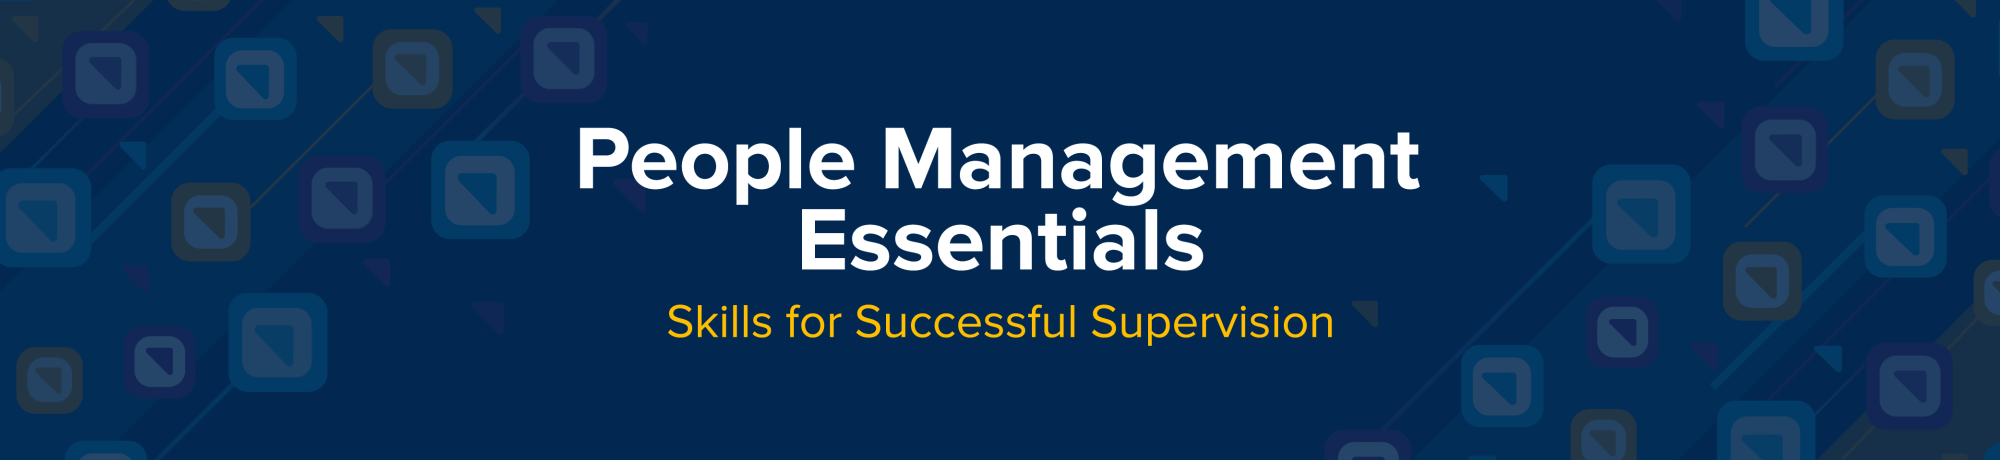 People Management Essentials Banner that includes the title, slogan, and branding elements.